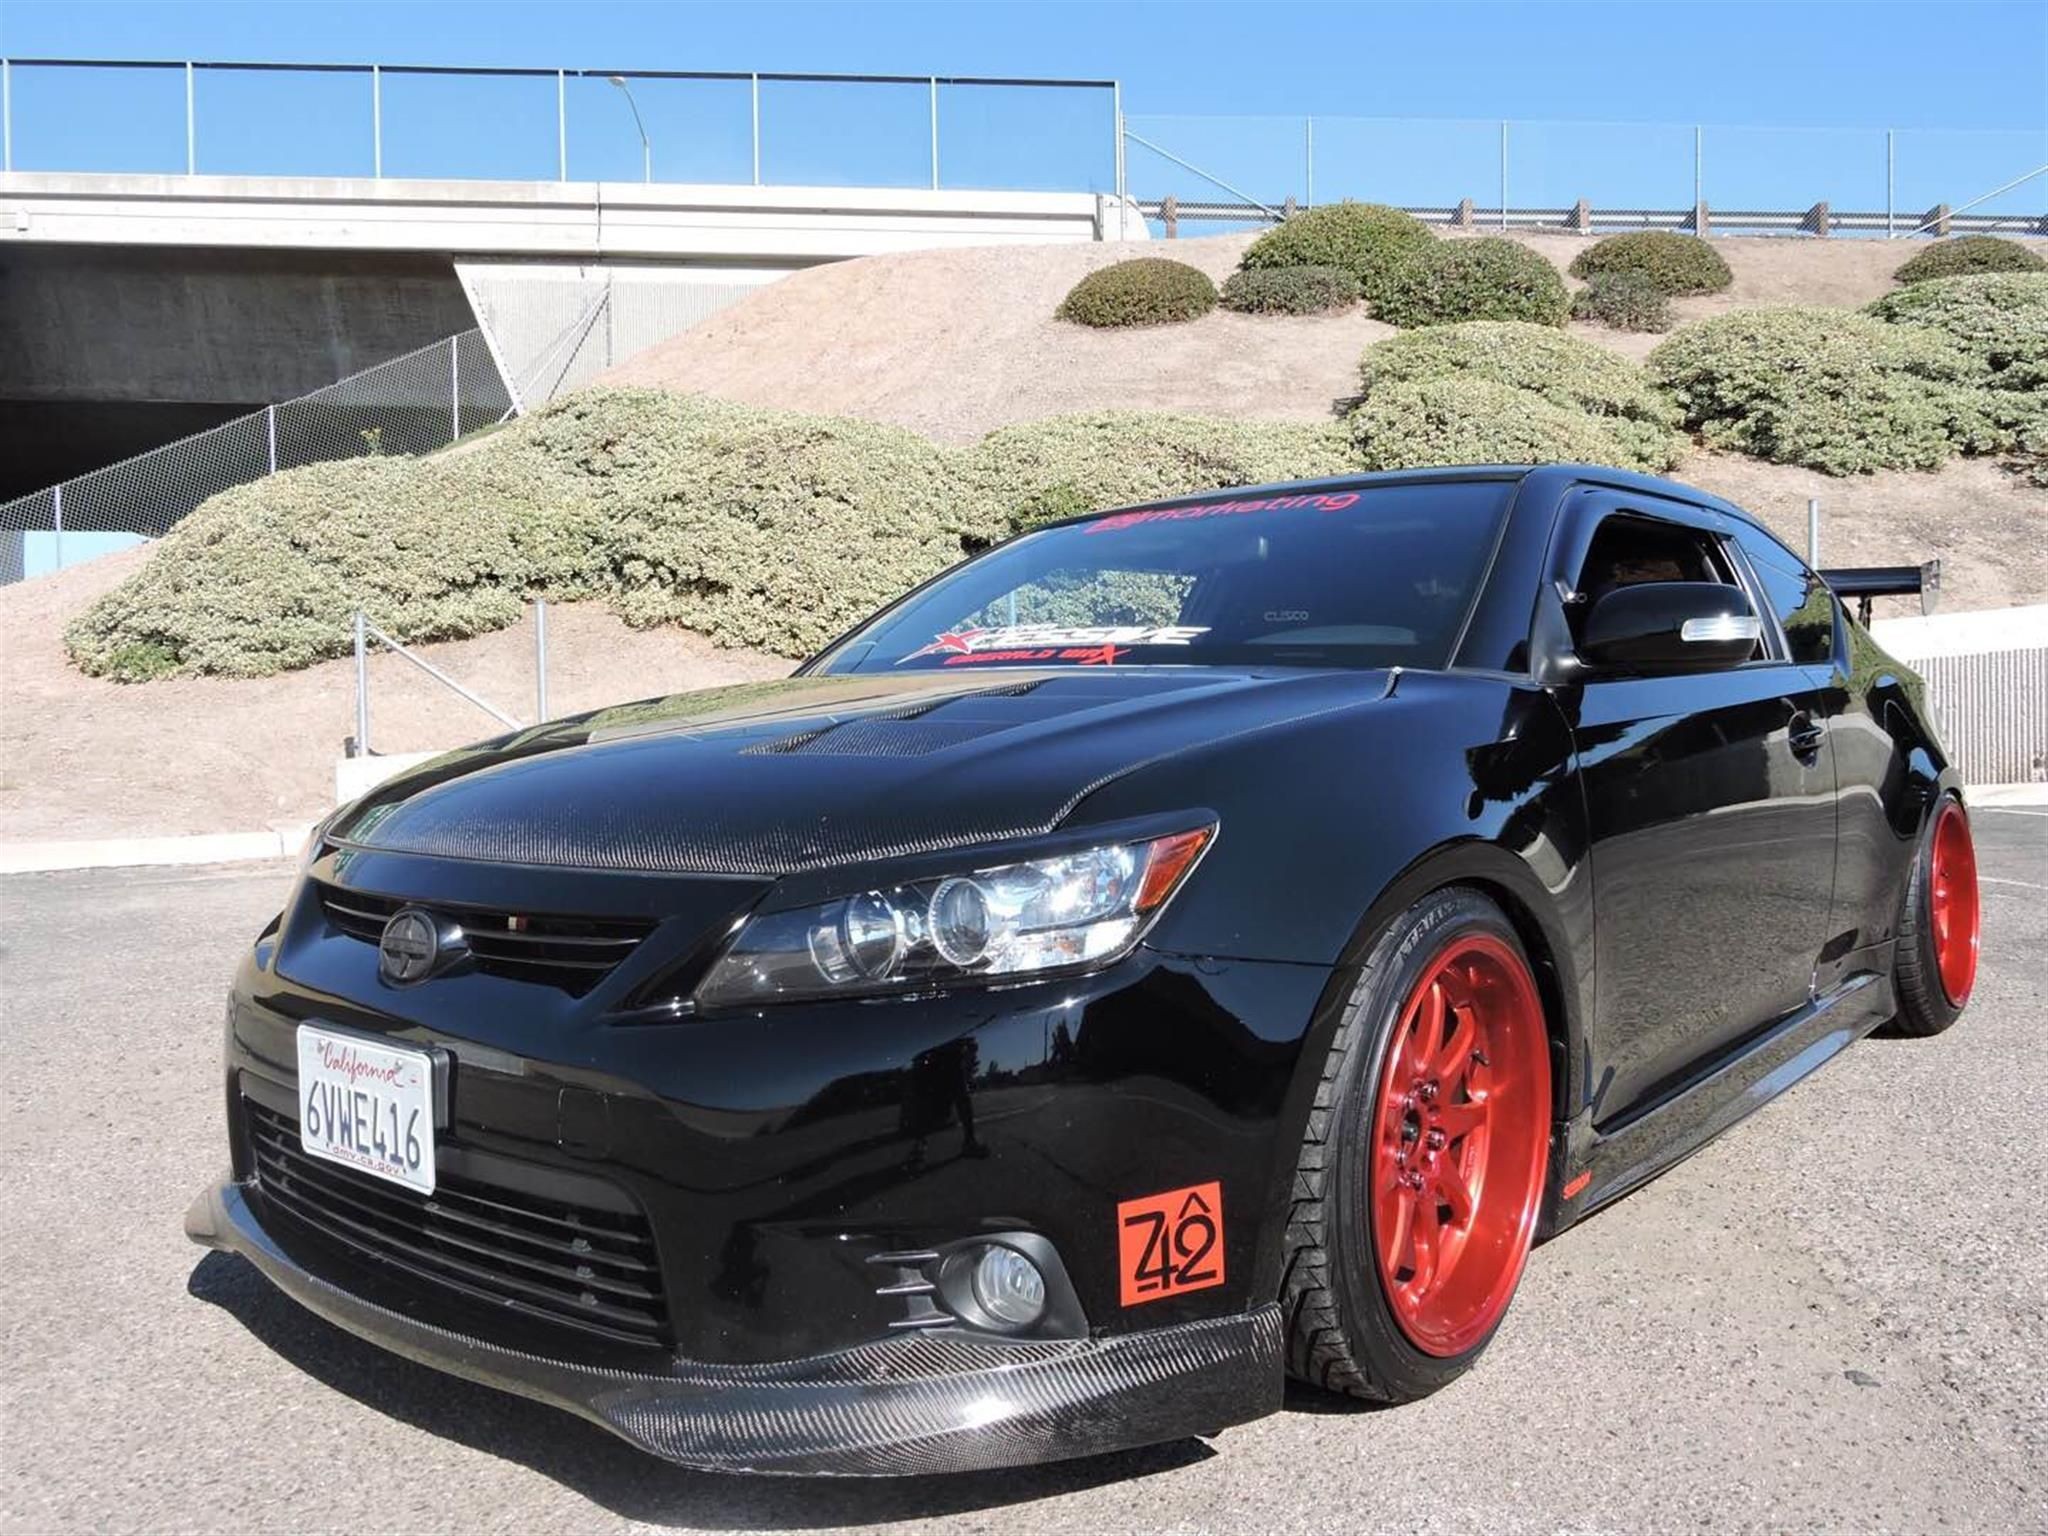 2012 Scion tC by Drew1201 to view more photos and mod info